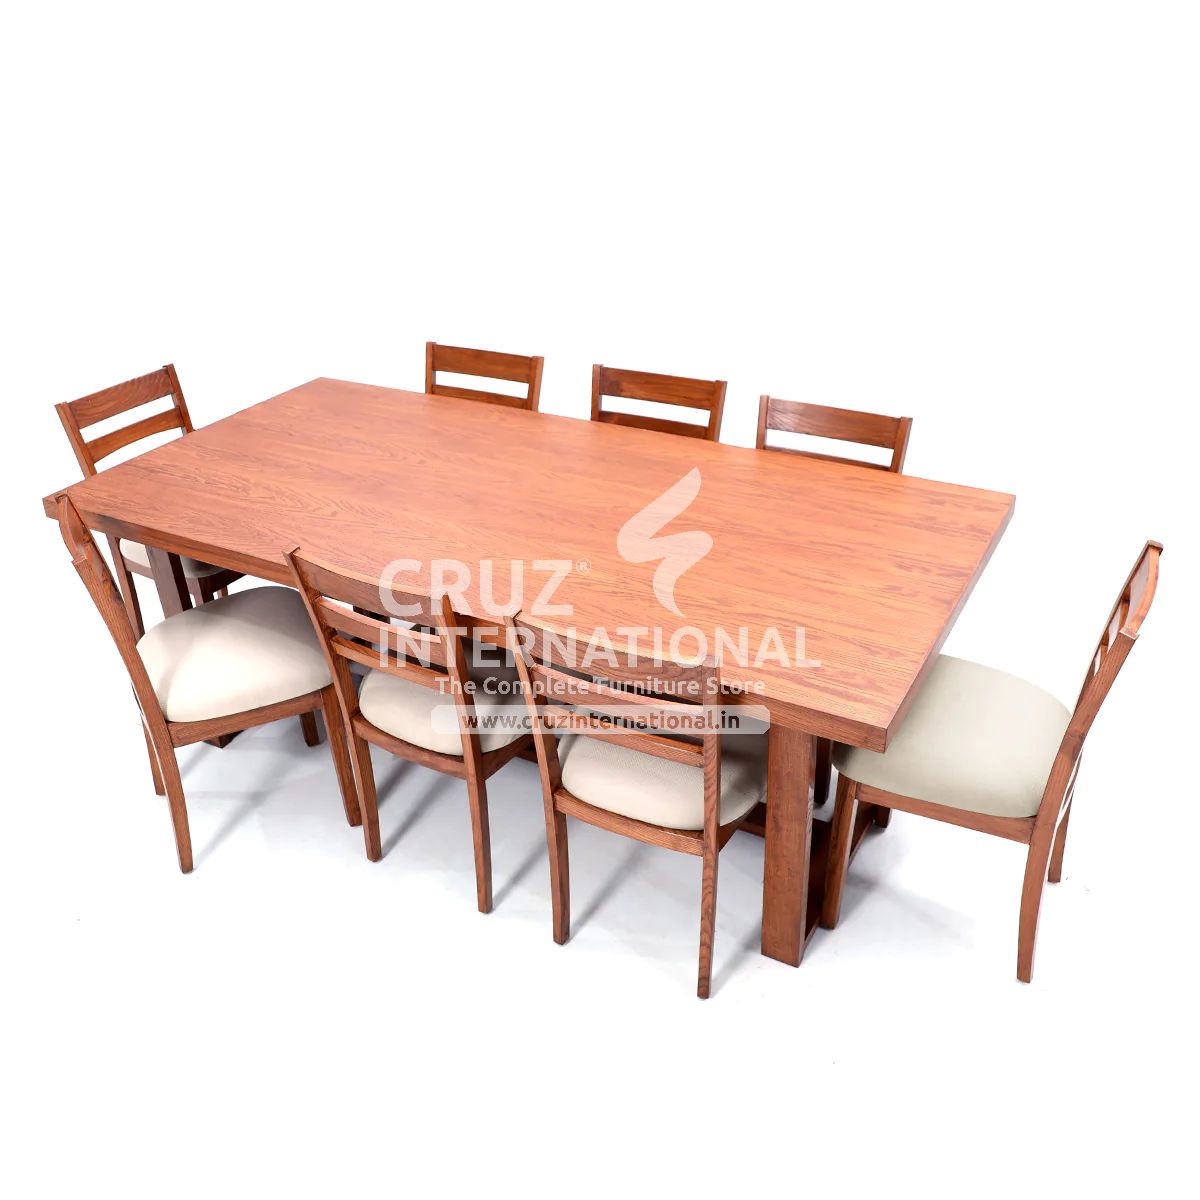 Classic Connor Benito Wooden Dinning Table | 8 Chairs & 1 Table CRUZ INTERNATIONAL